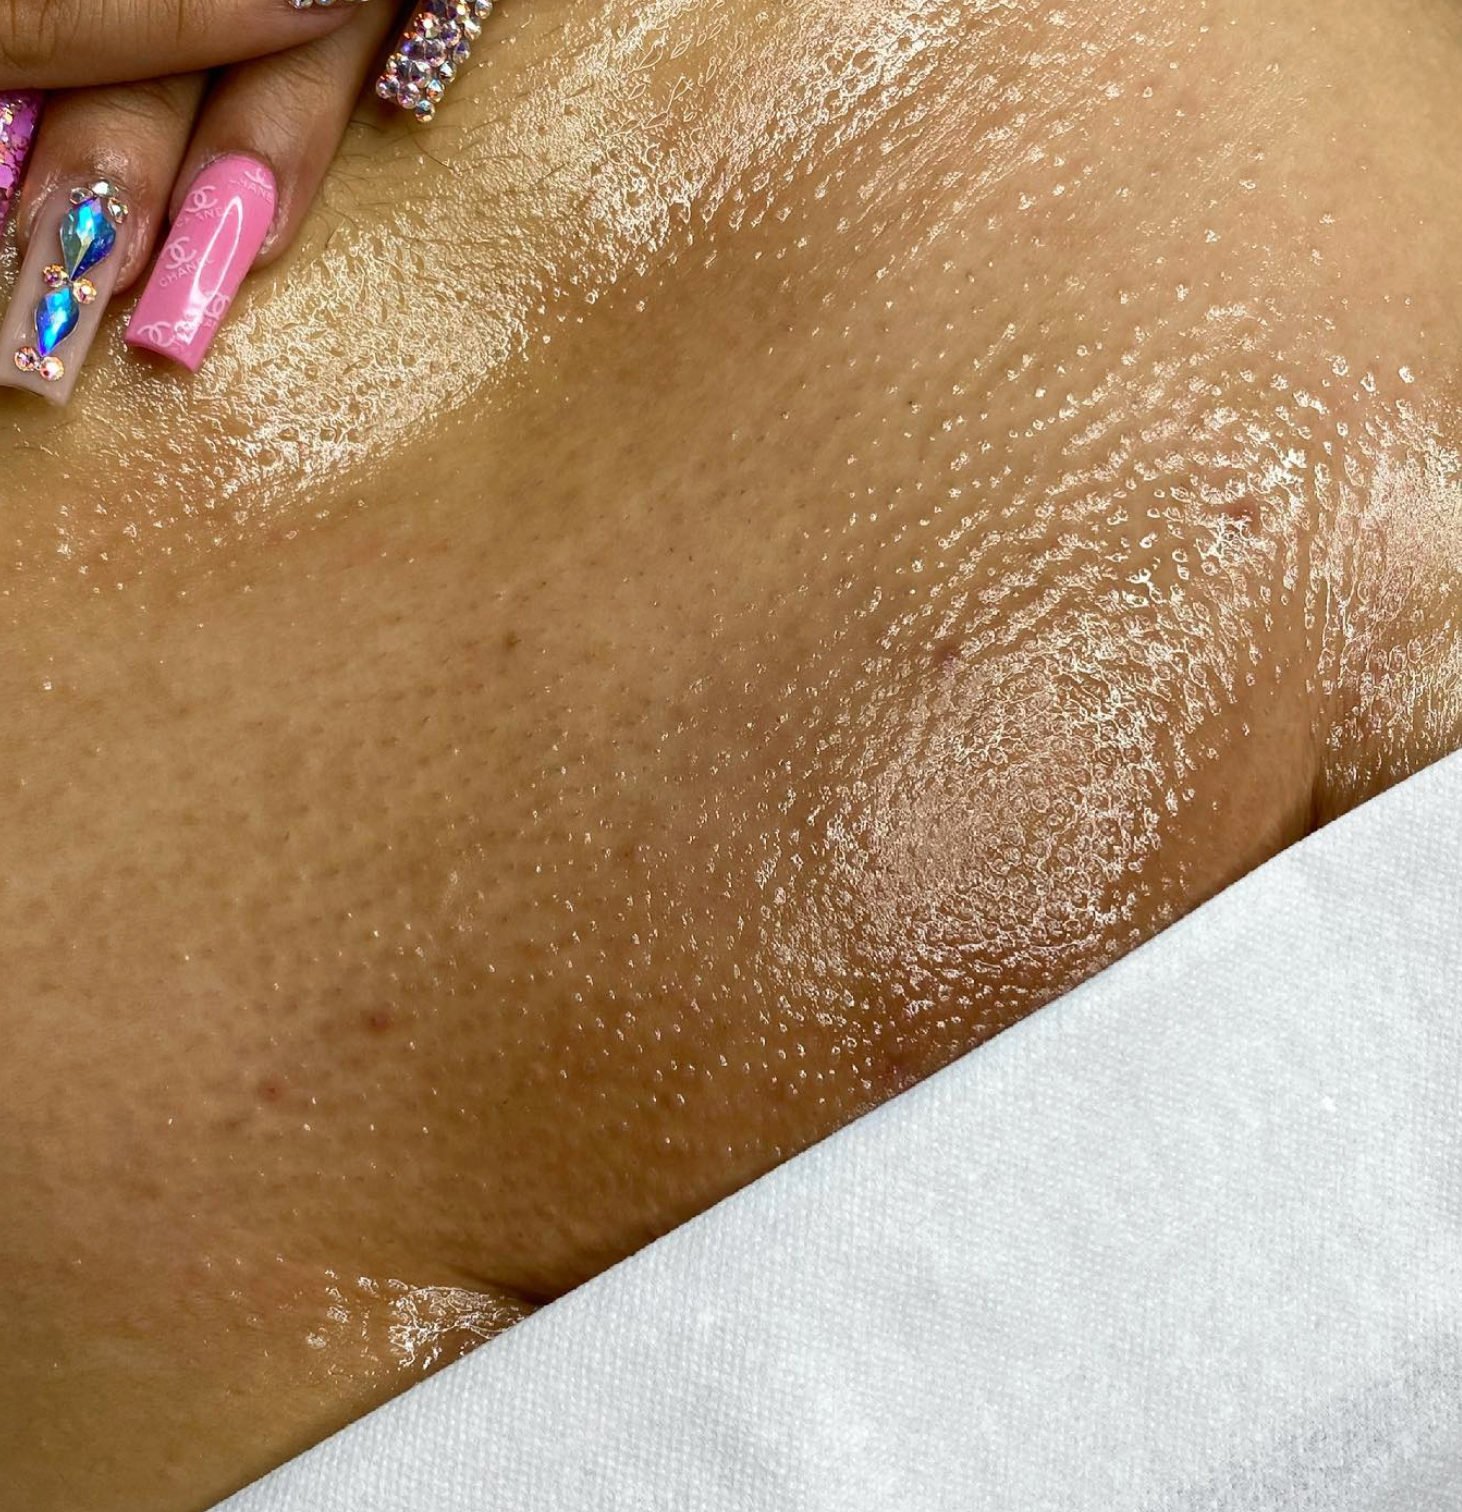 Brazilian Wax Before and After Photos